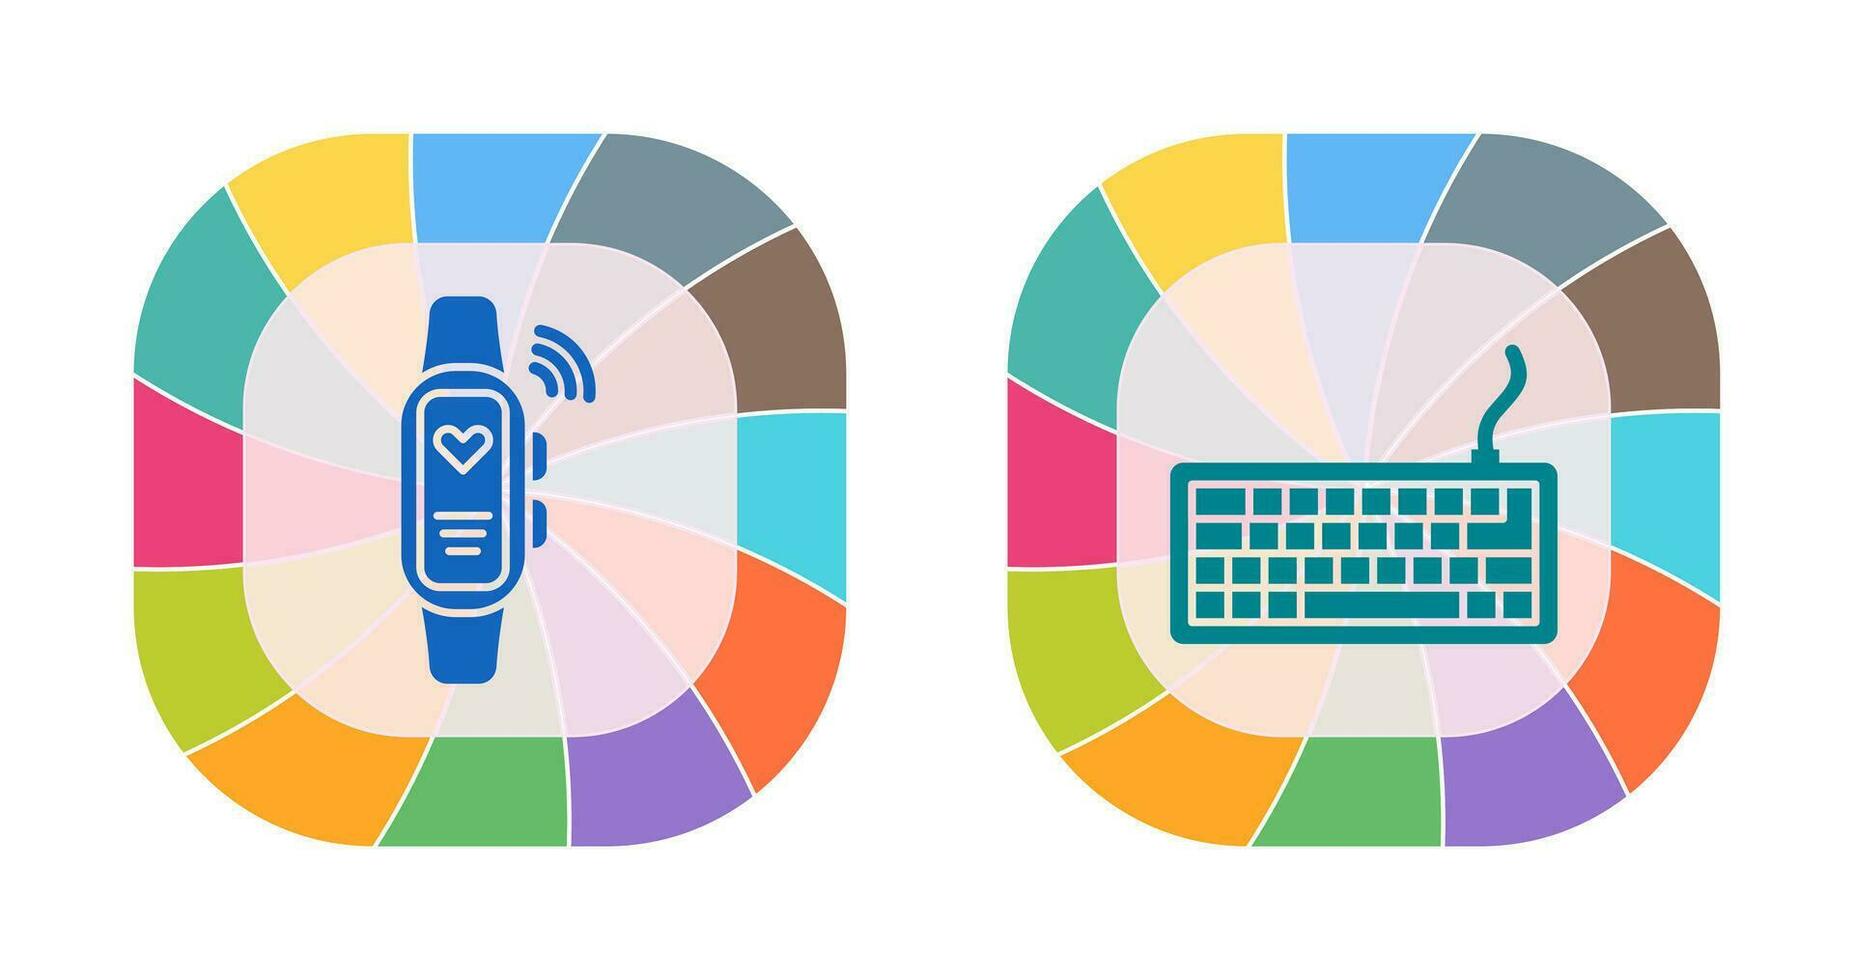 Smart Band and Keyboard Icon vector